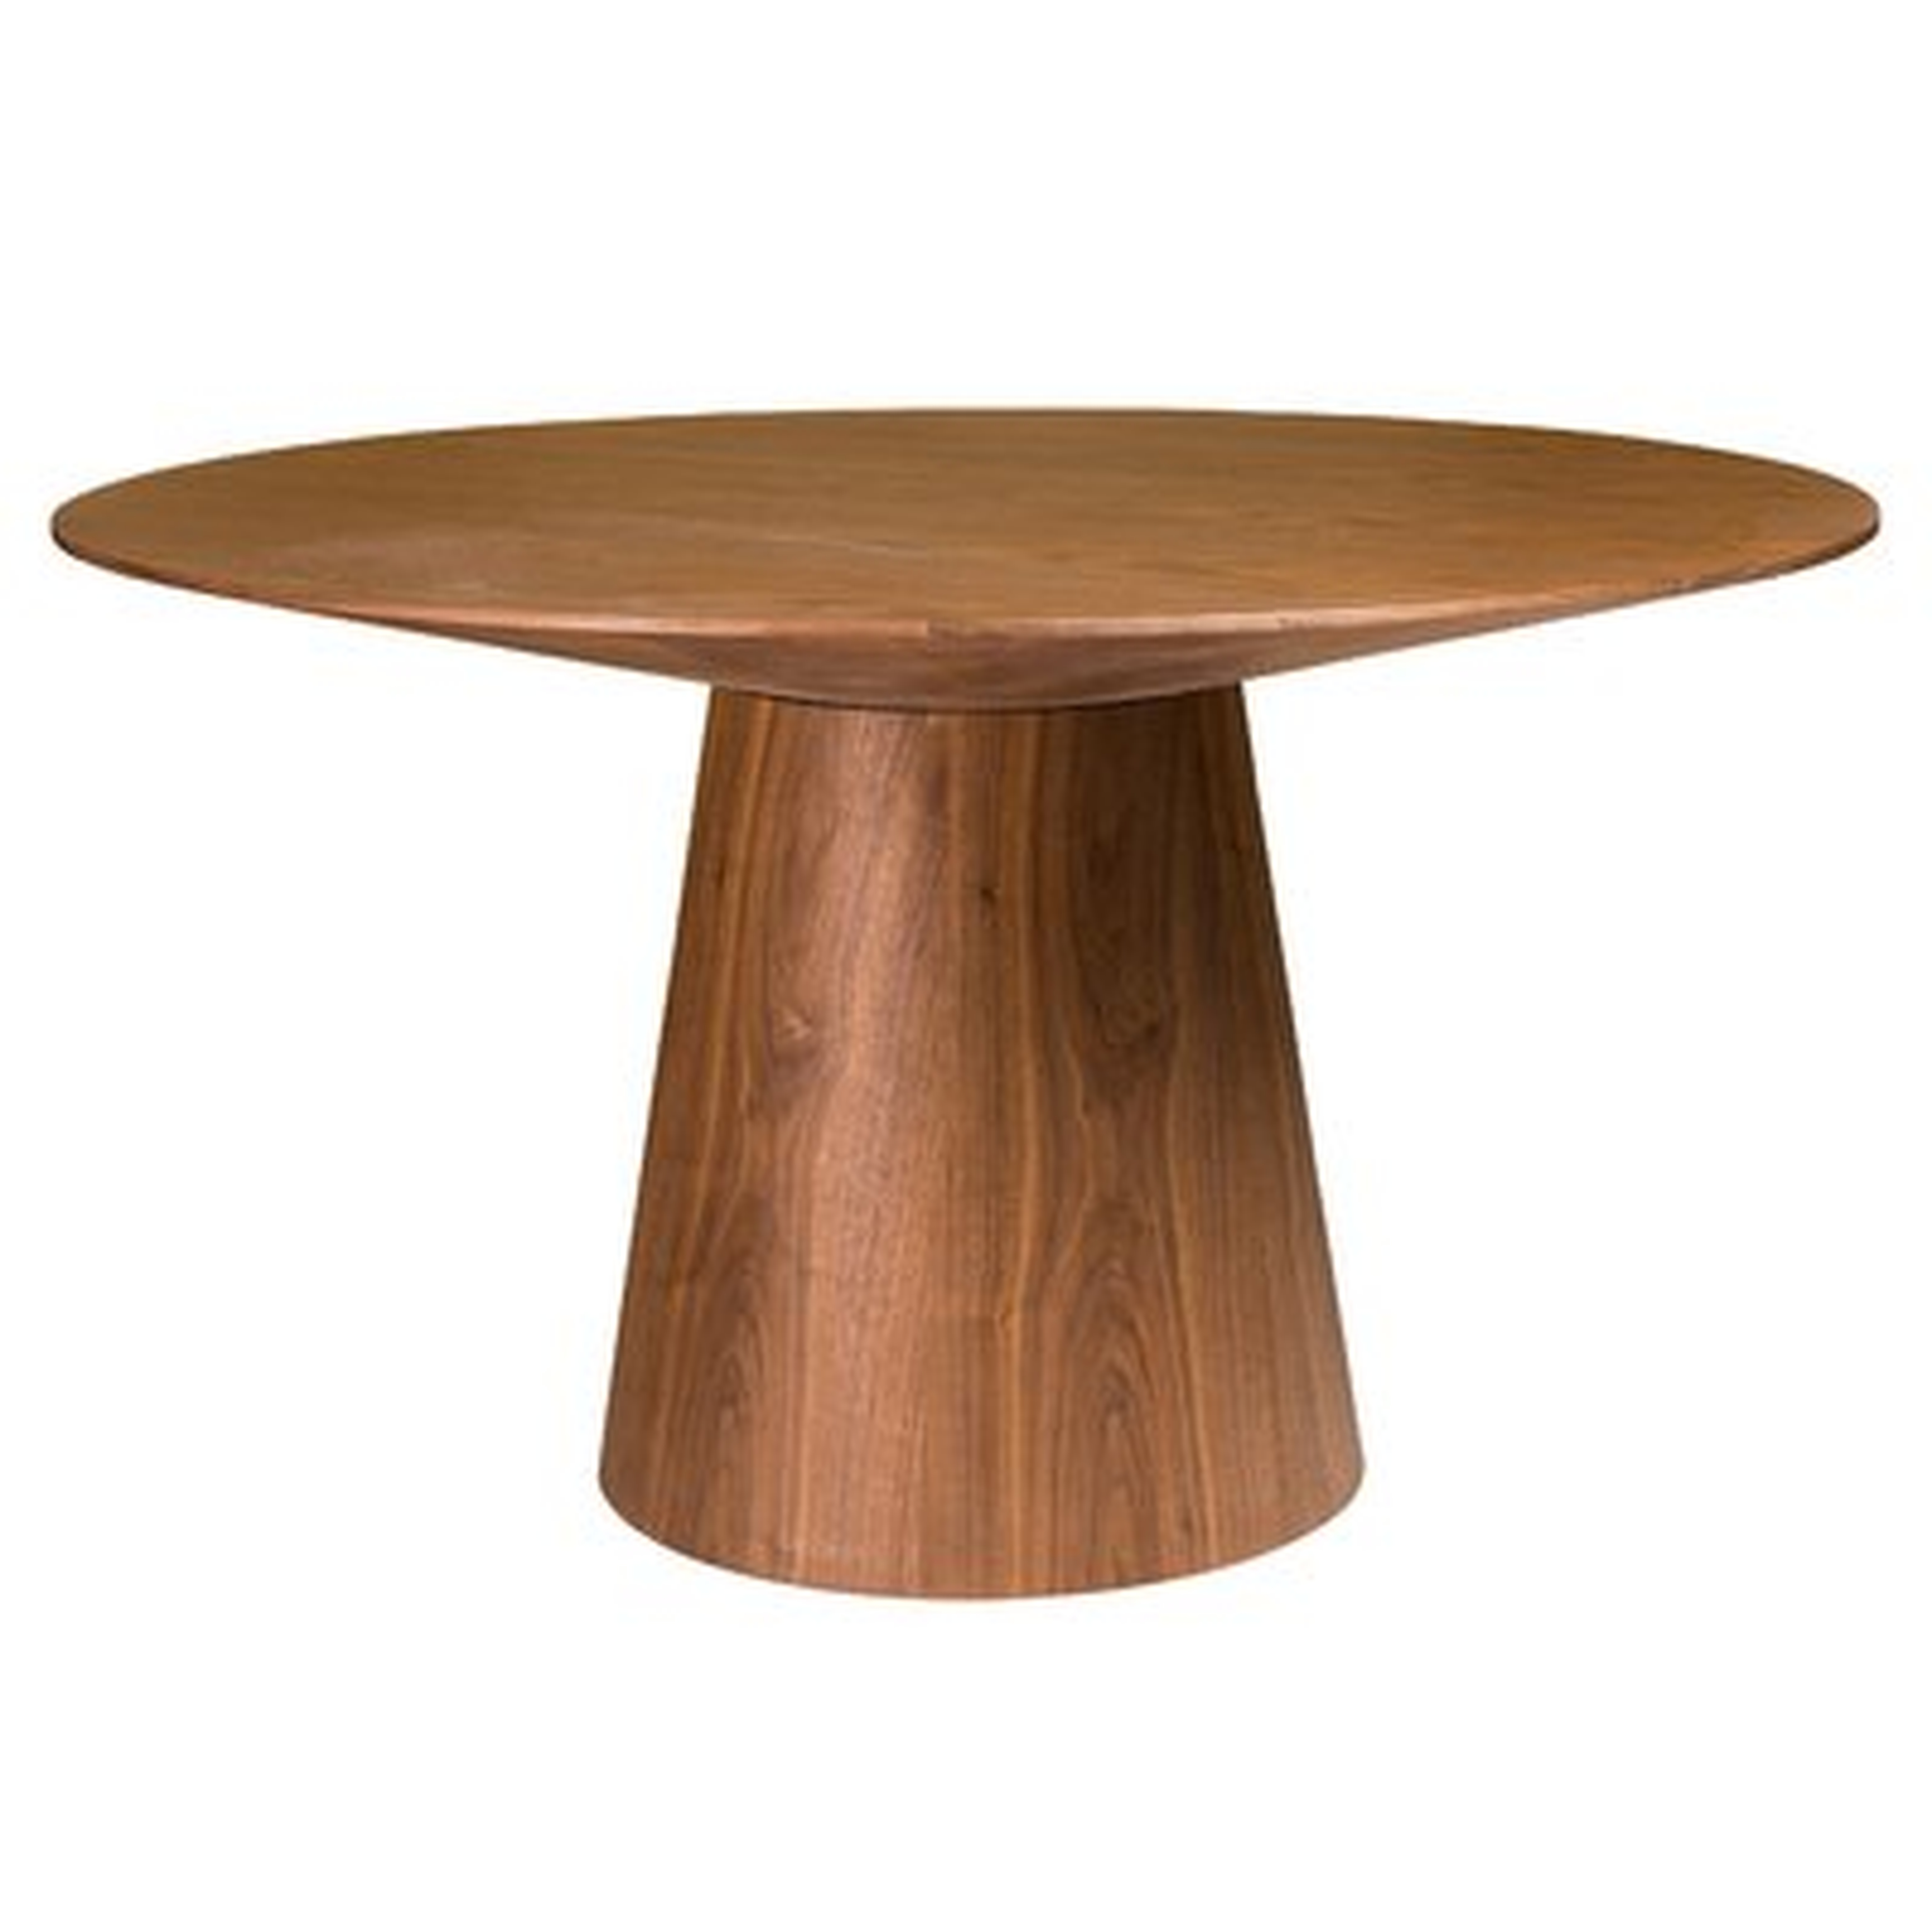 Lolley Round Dining Table - Wayfair